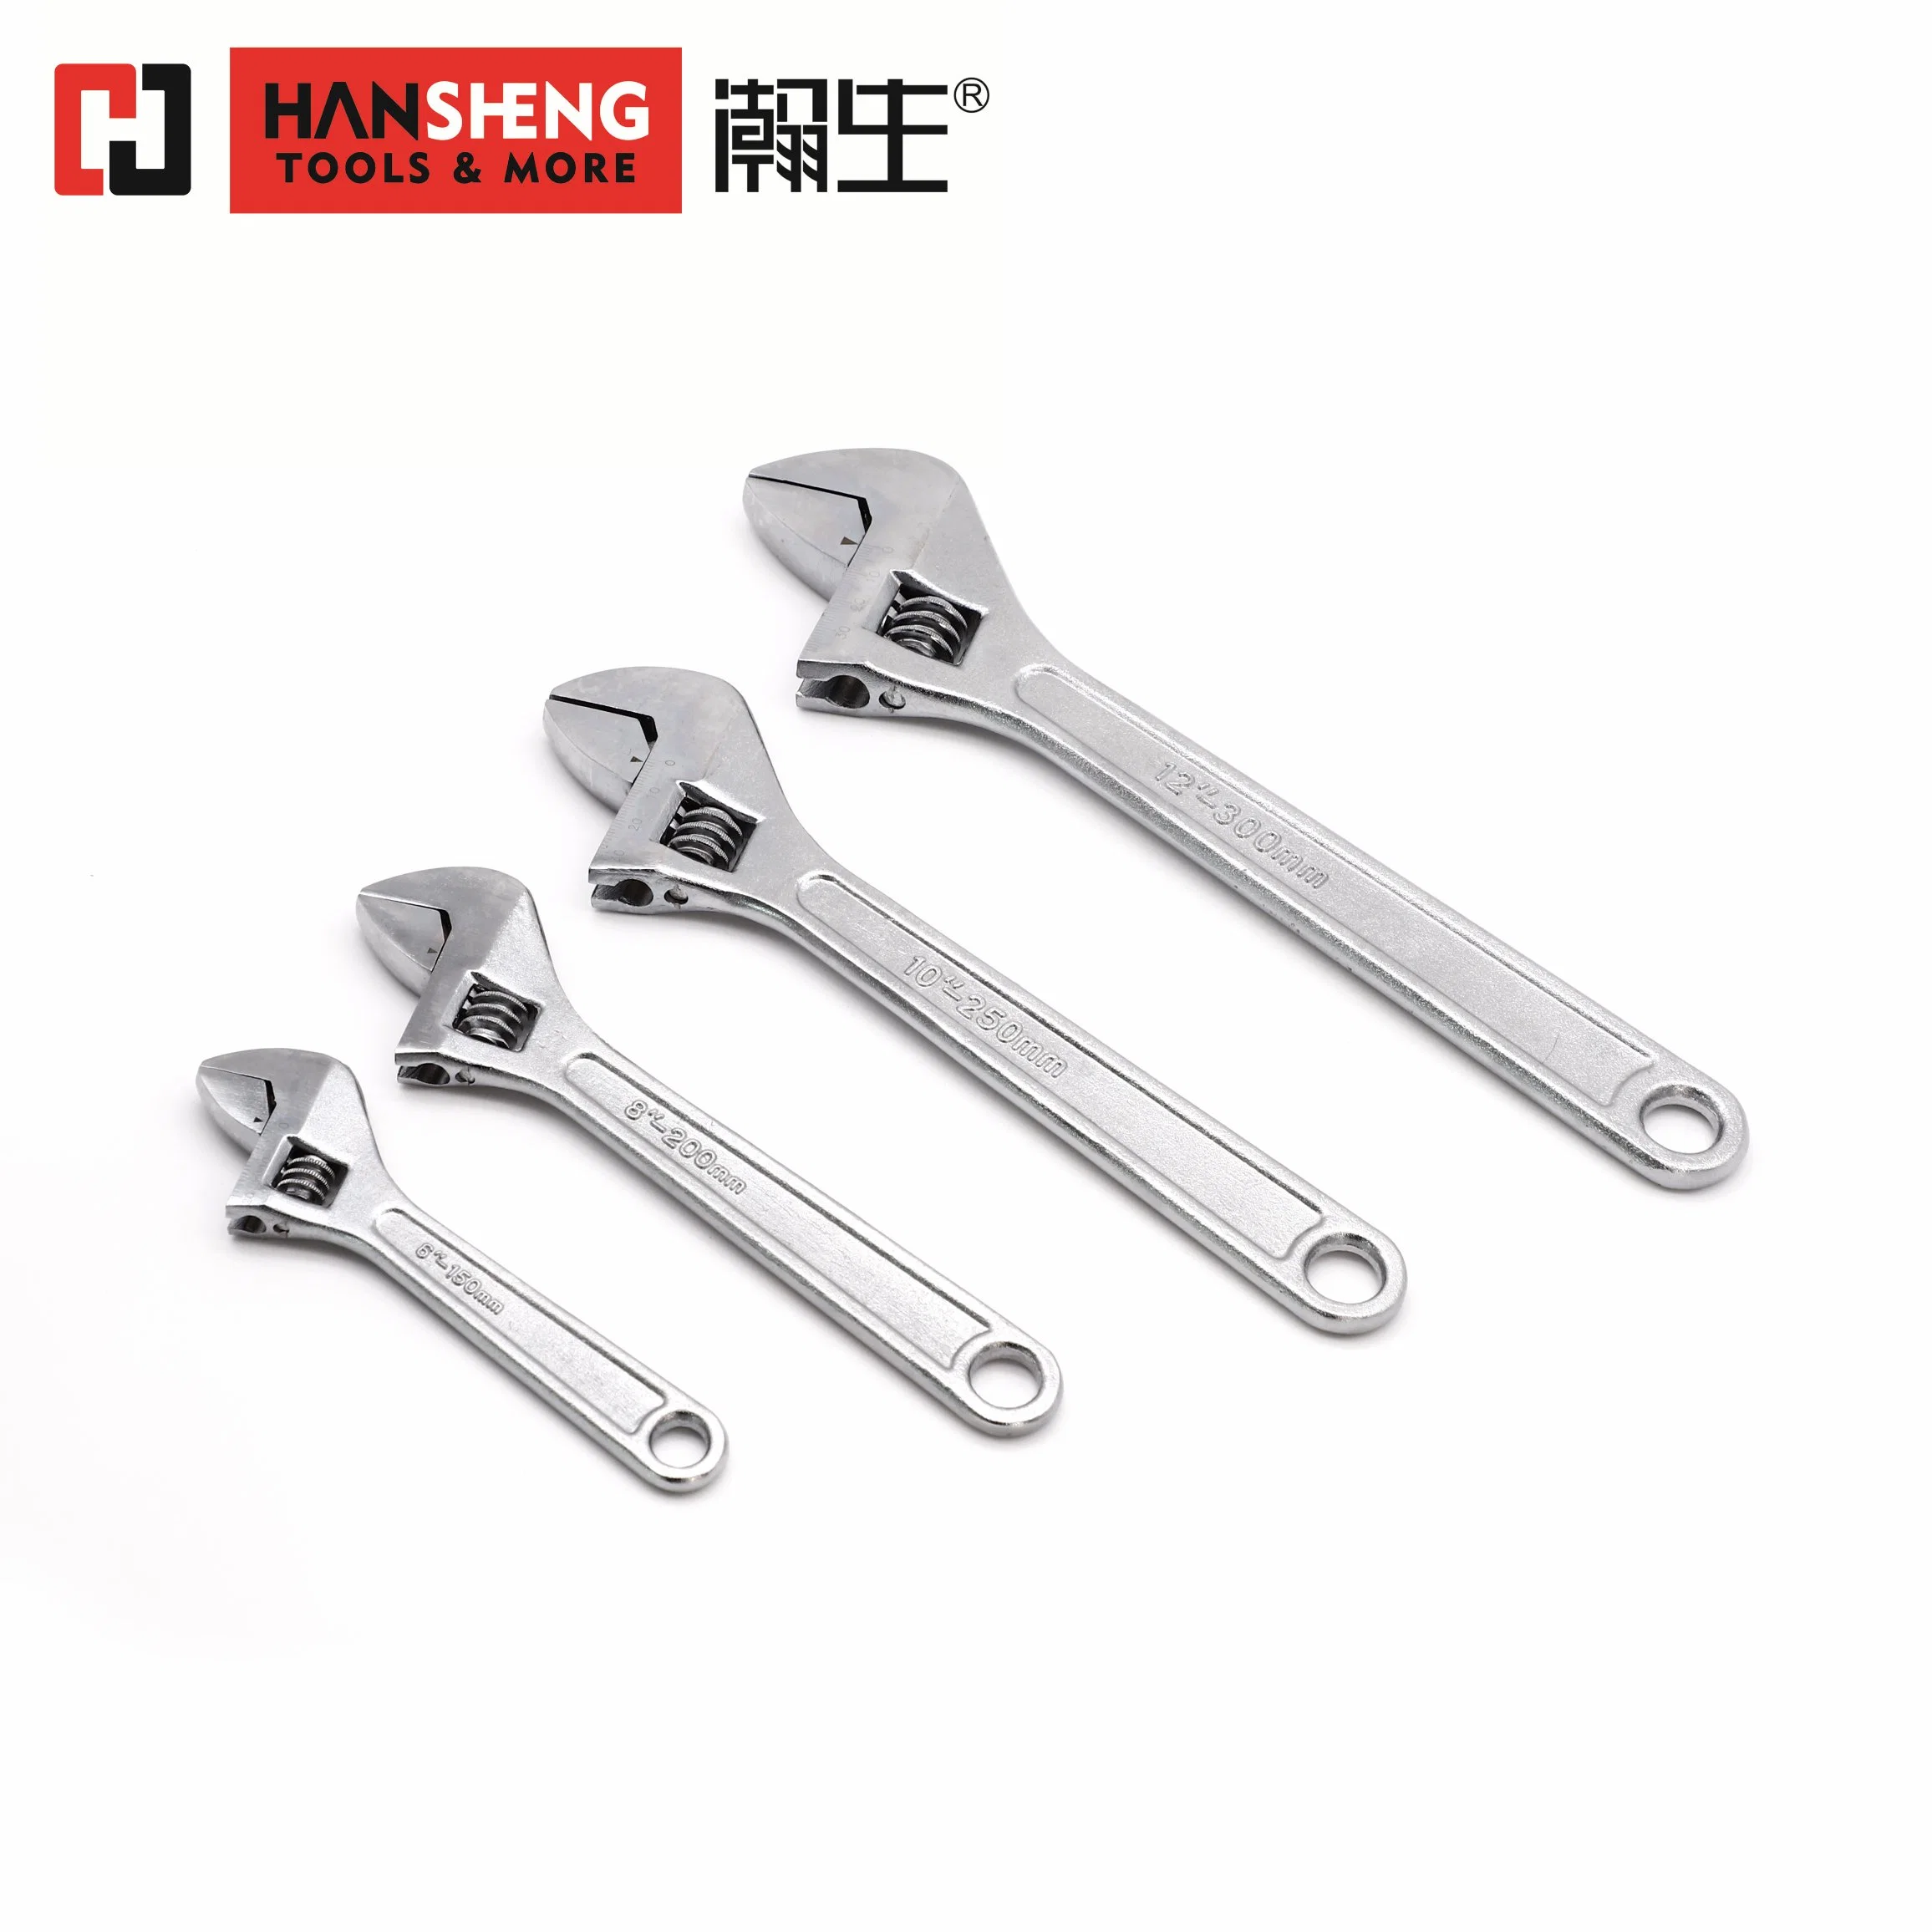 Professional Hand Tool, Hardware, Made of Carbon Steel, Chrome Plated, Dipped Handle, Adjustable Wrench Spanner